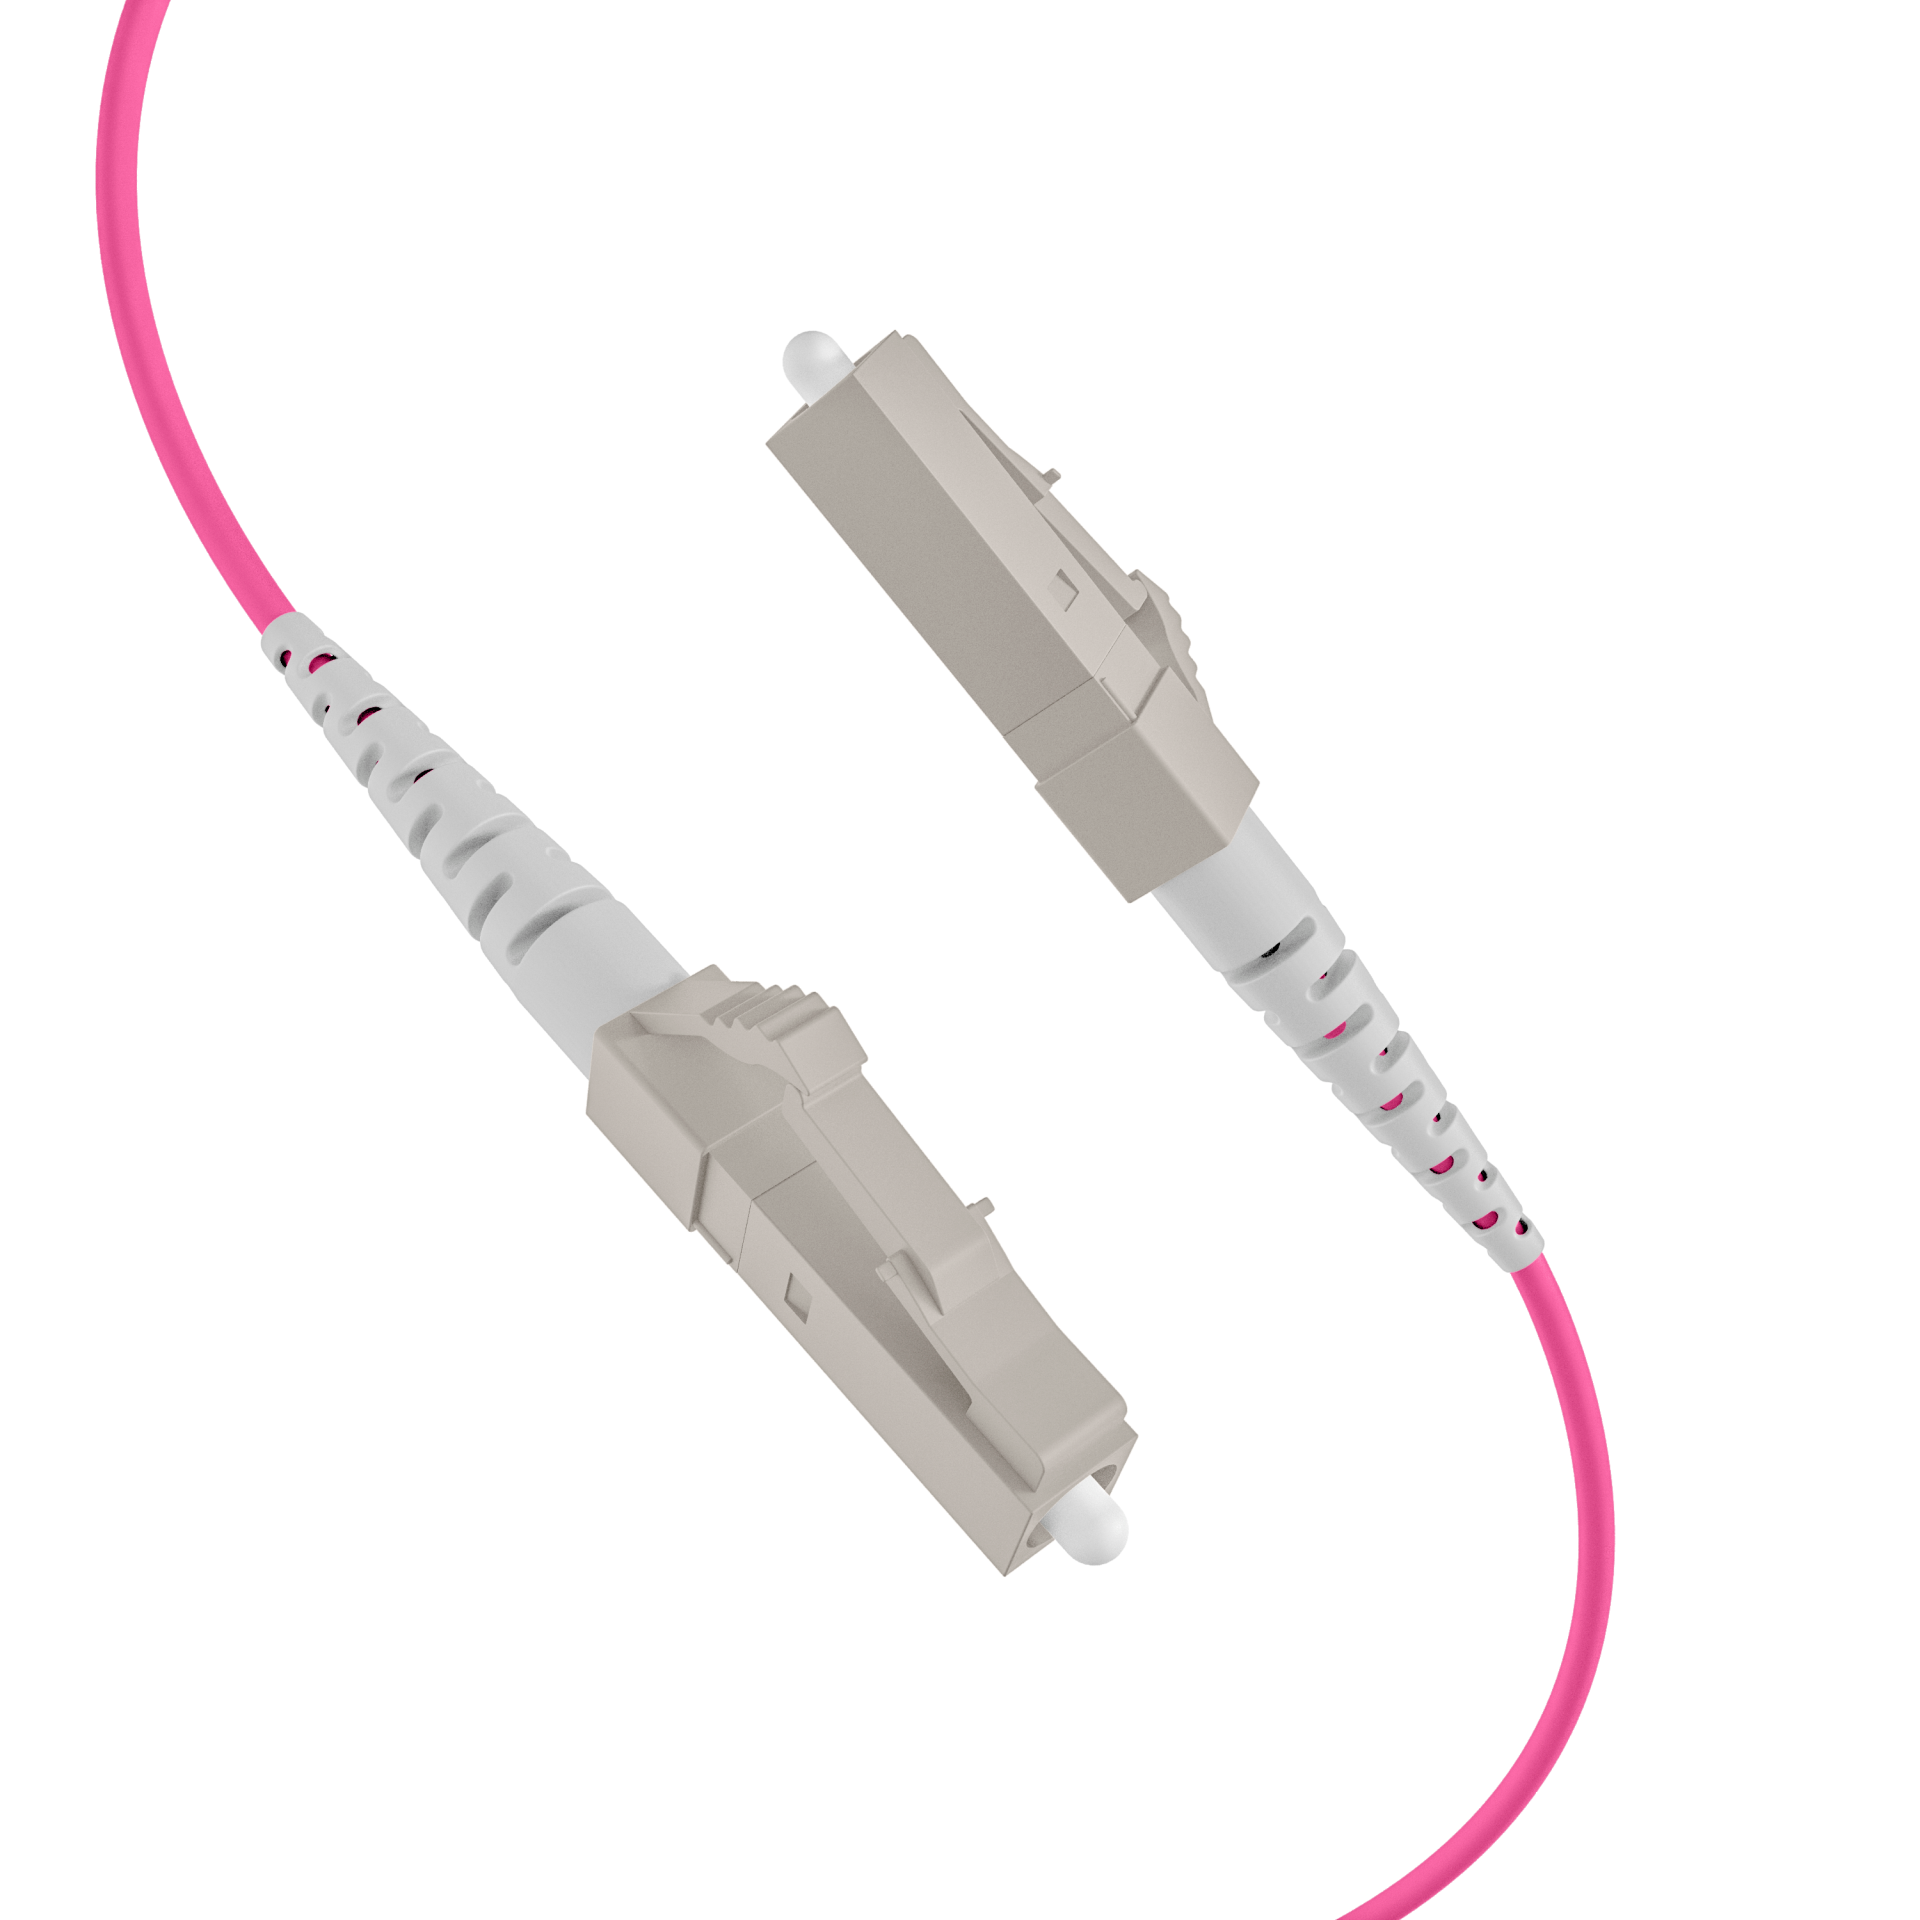 Trunkcable U-DQ(ZN)BH OM4 8G (1x8) LC-LC,100m Dca LSZH